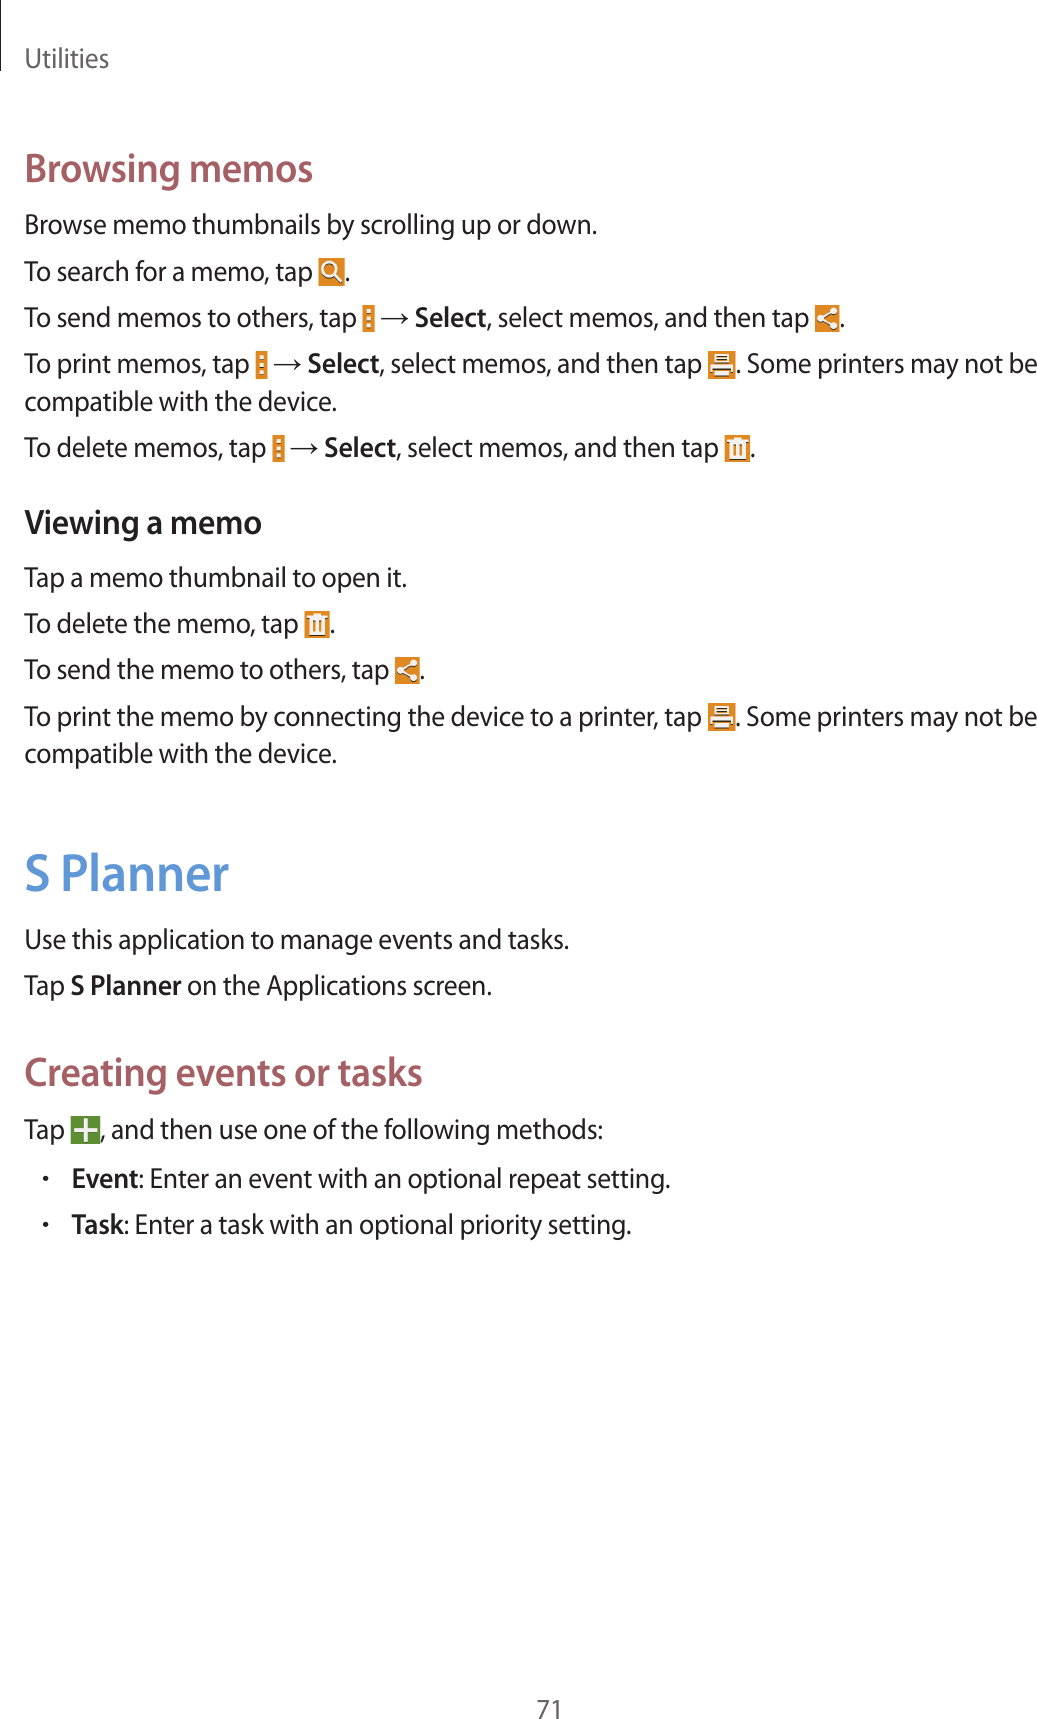 Utilities71Browsing memosBrowse memo thumbnails by scrolling up or down.To search for a memo, tap  .To send memos to others, tap   → Select, select memos, and then tap  .To print memos, tap   → Select, select memos, and then tap  . Some printers may not be compatible with the device.To delete memos, tap   → Select, select memos, and then tap  .Viewing a memoTap a memo thumbnail to open it.To delete the memo, tap  .To send the memo to others, tap  .To print the memo by connecting the device to a printer, tap  . Some printers may not be compatible with the device.S PlannerUse this application to manage events and tasks.Tap S Planner on the Applications screen.Creating events or tasksTap  , and then use one of the following methods:•Event: Enter an event with an optional repeat setting.•Task: Enter a task with an optional priority setting.